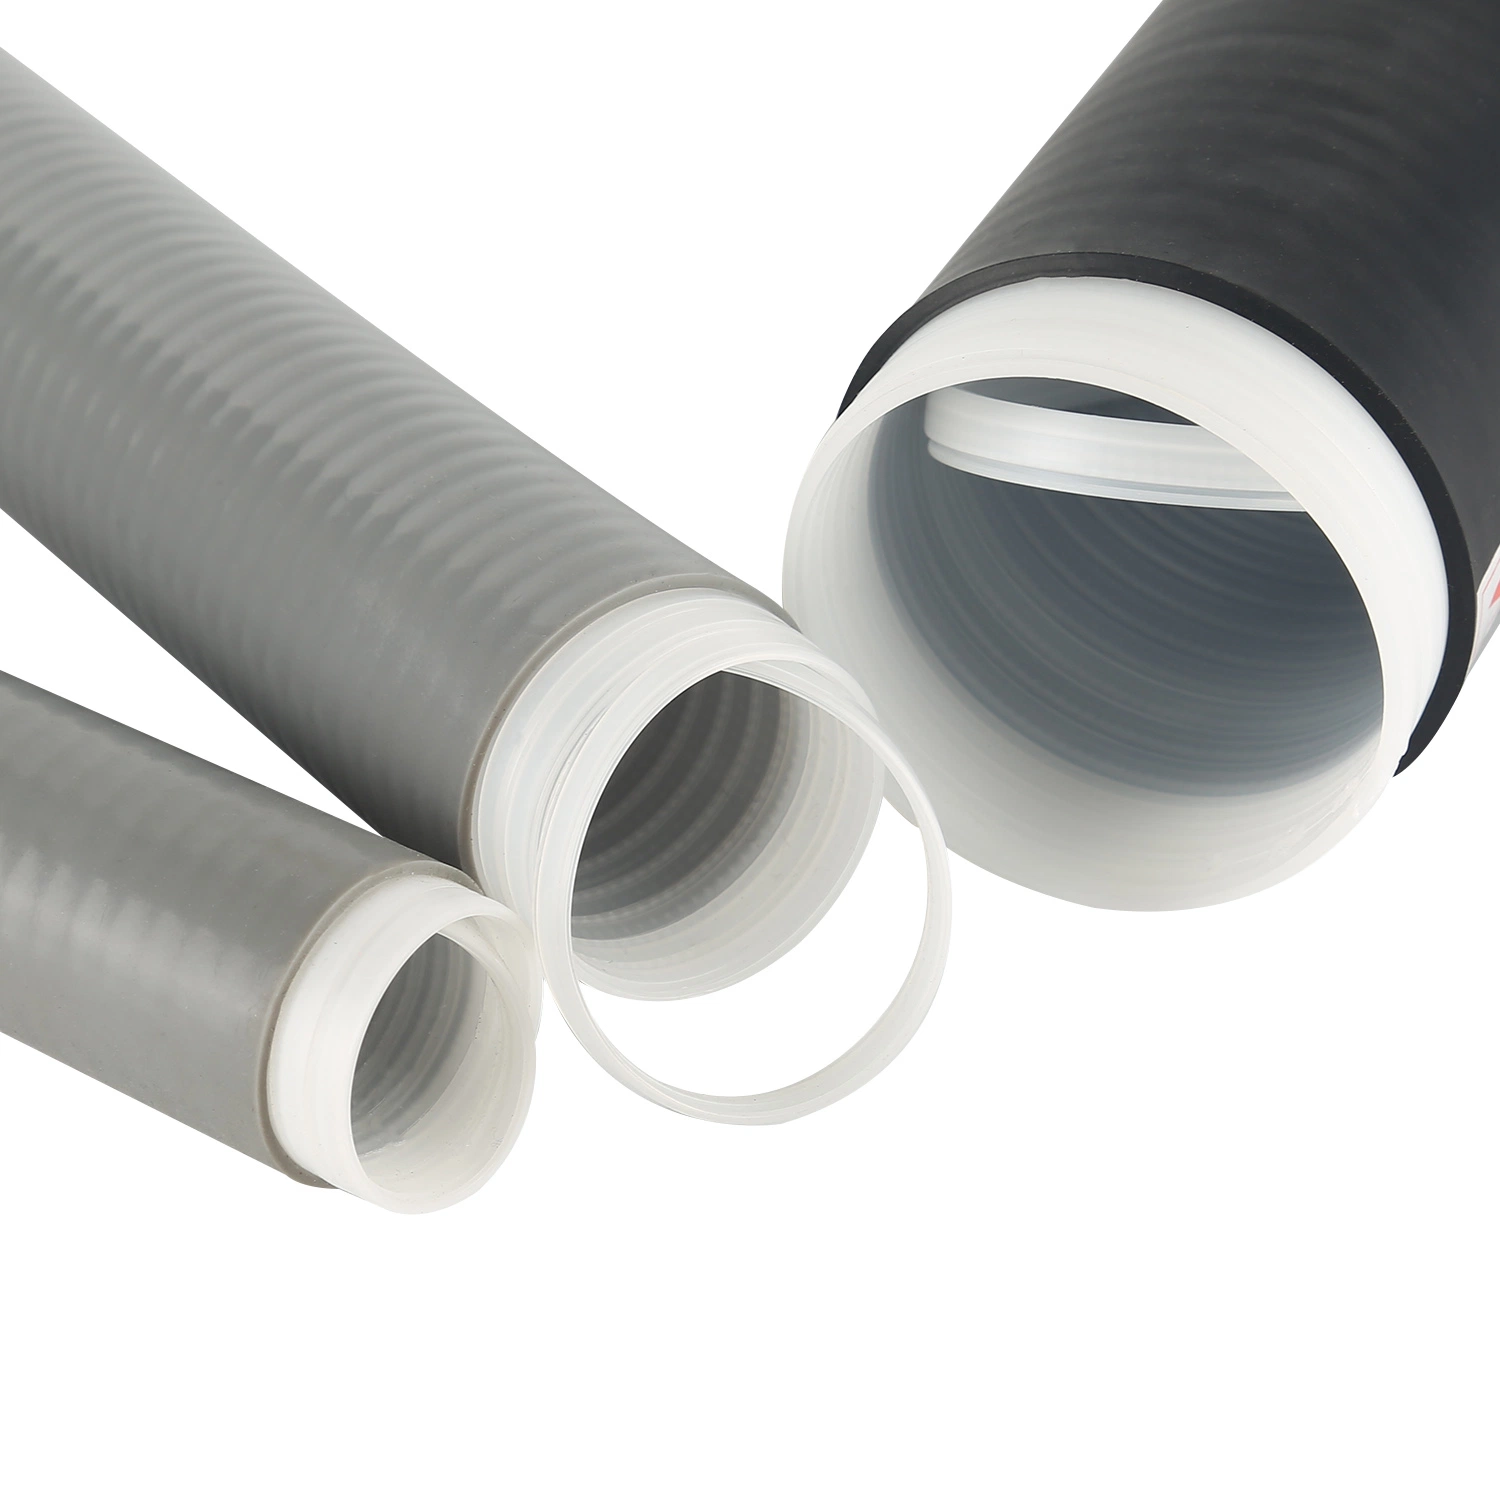 Cold Shrink Tube IP67 Insulation Tube Silicone Wrap for Ebike Rubber EPDM, Silicone Waterproof, High Voltage -40 to 85 45mm 40cm